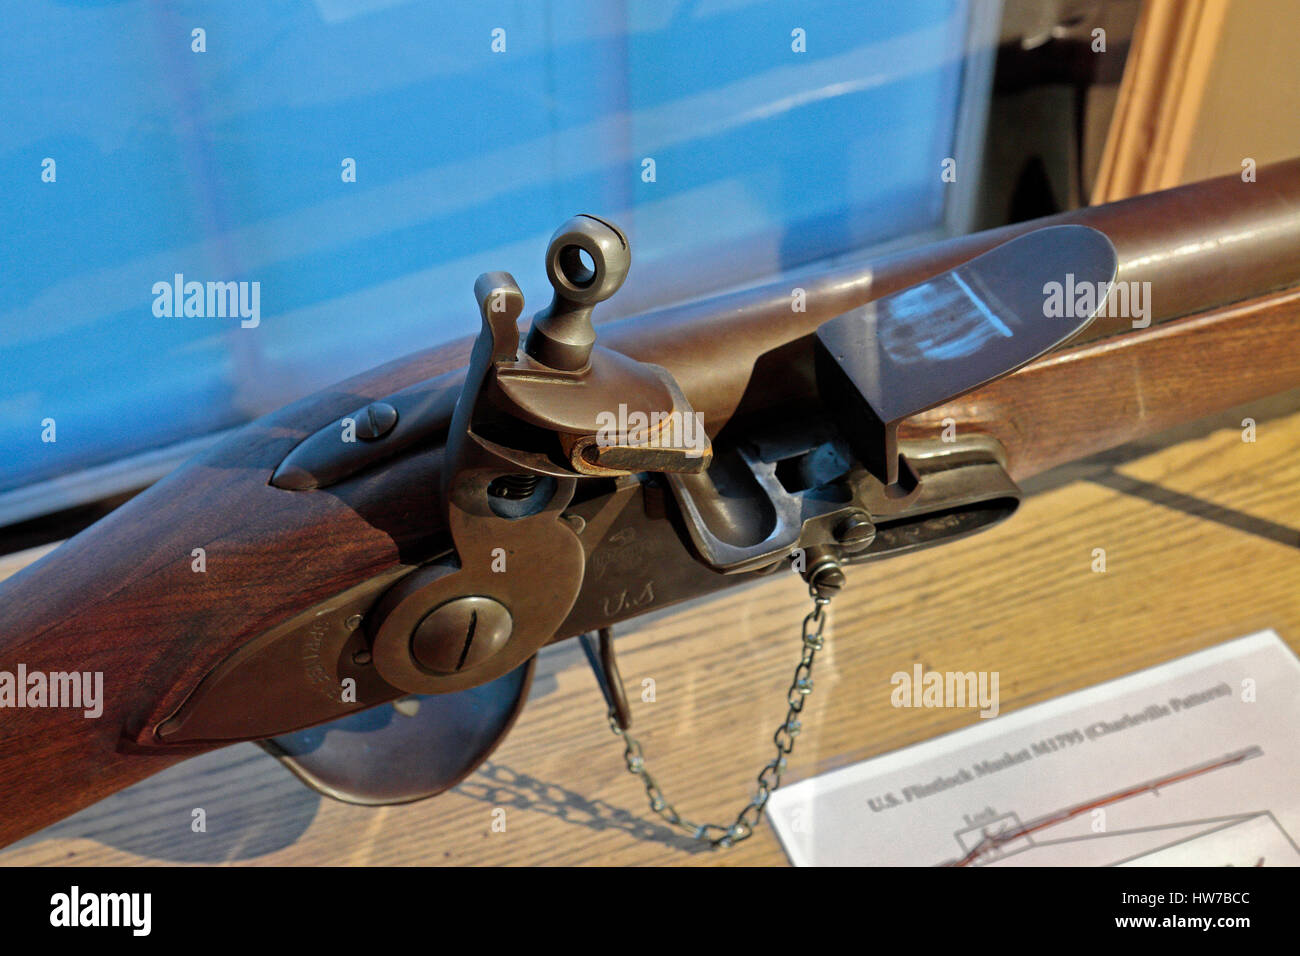 A US Flintlock Musket M1795 (Charleville Pattern) on display in the Springfield Armory National Historic Site, Springfield, Ma, United States. Stock Photo